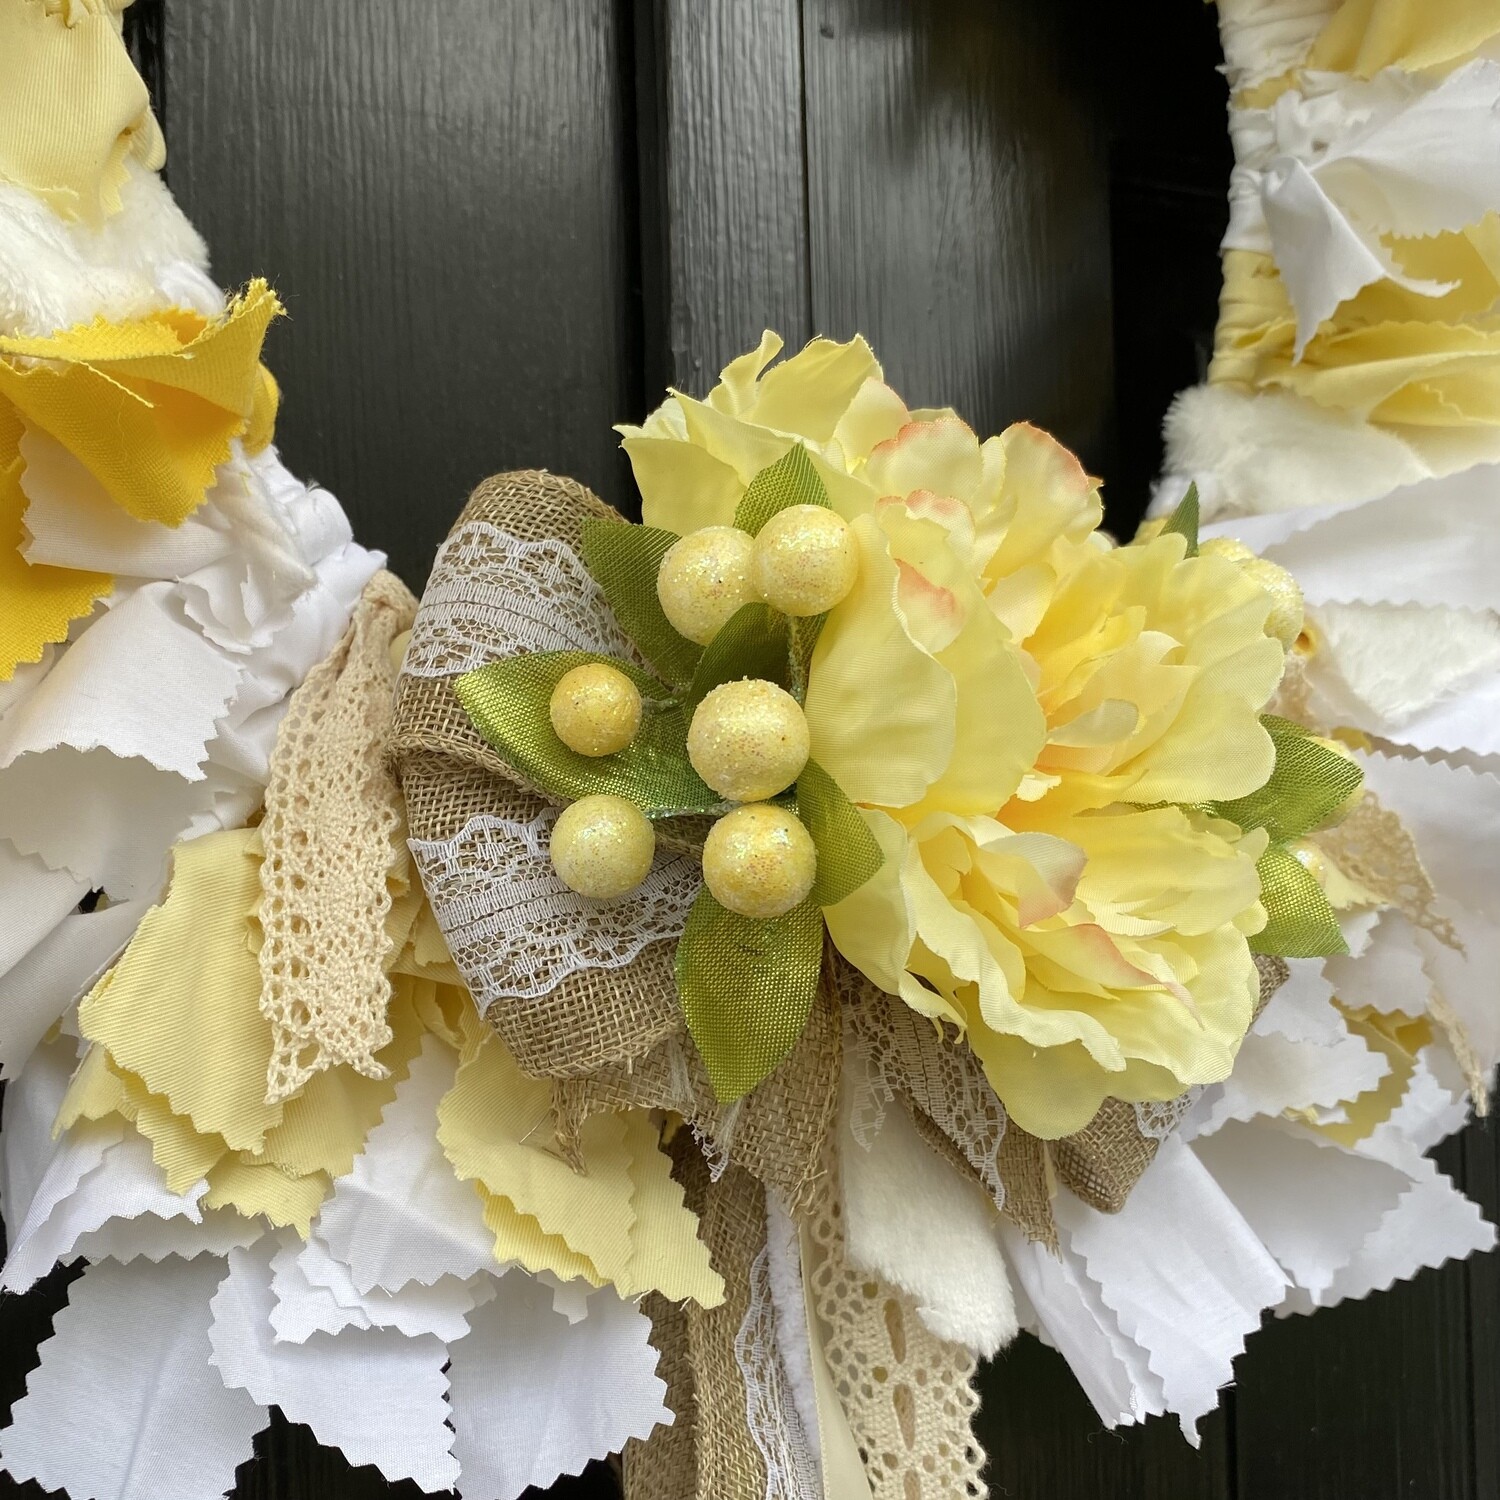 Sprinkles of Sunshine Full Size (18”) Round Yellow and White Fabric Wreath with Detachable Multi-Layered Flowing Ribbon Bow